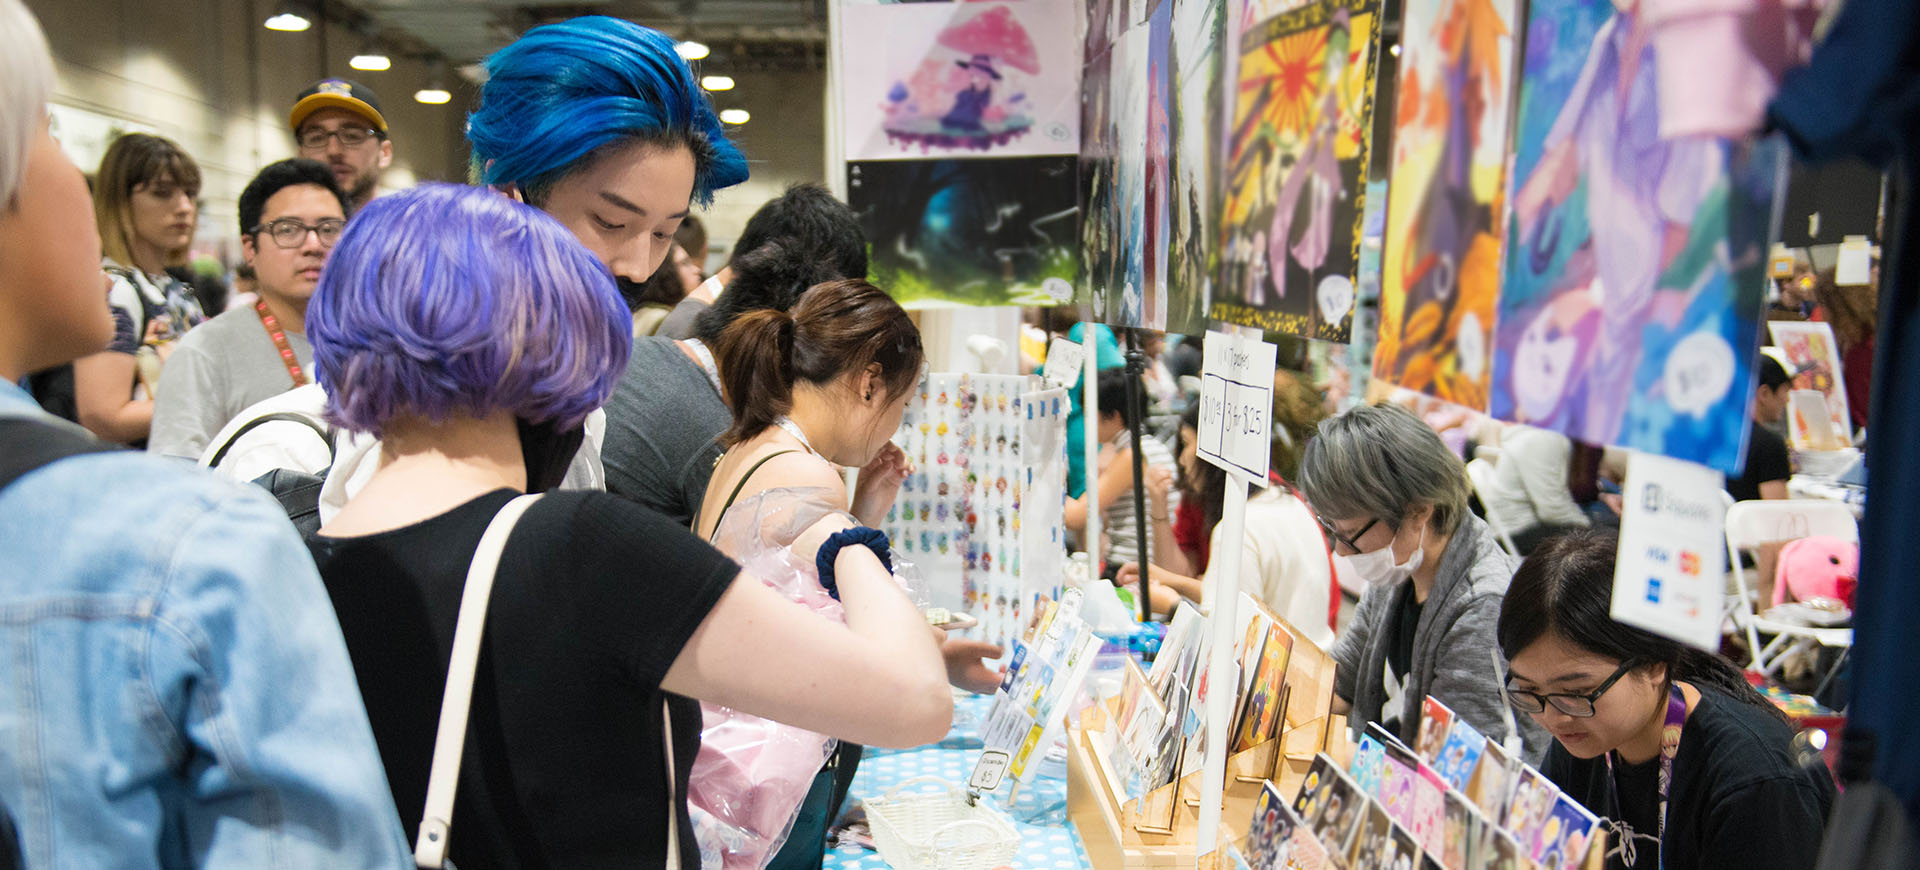 Anime Expo | Artist Alley | Los Angeles Anime Convention